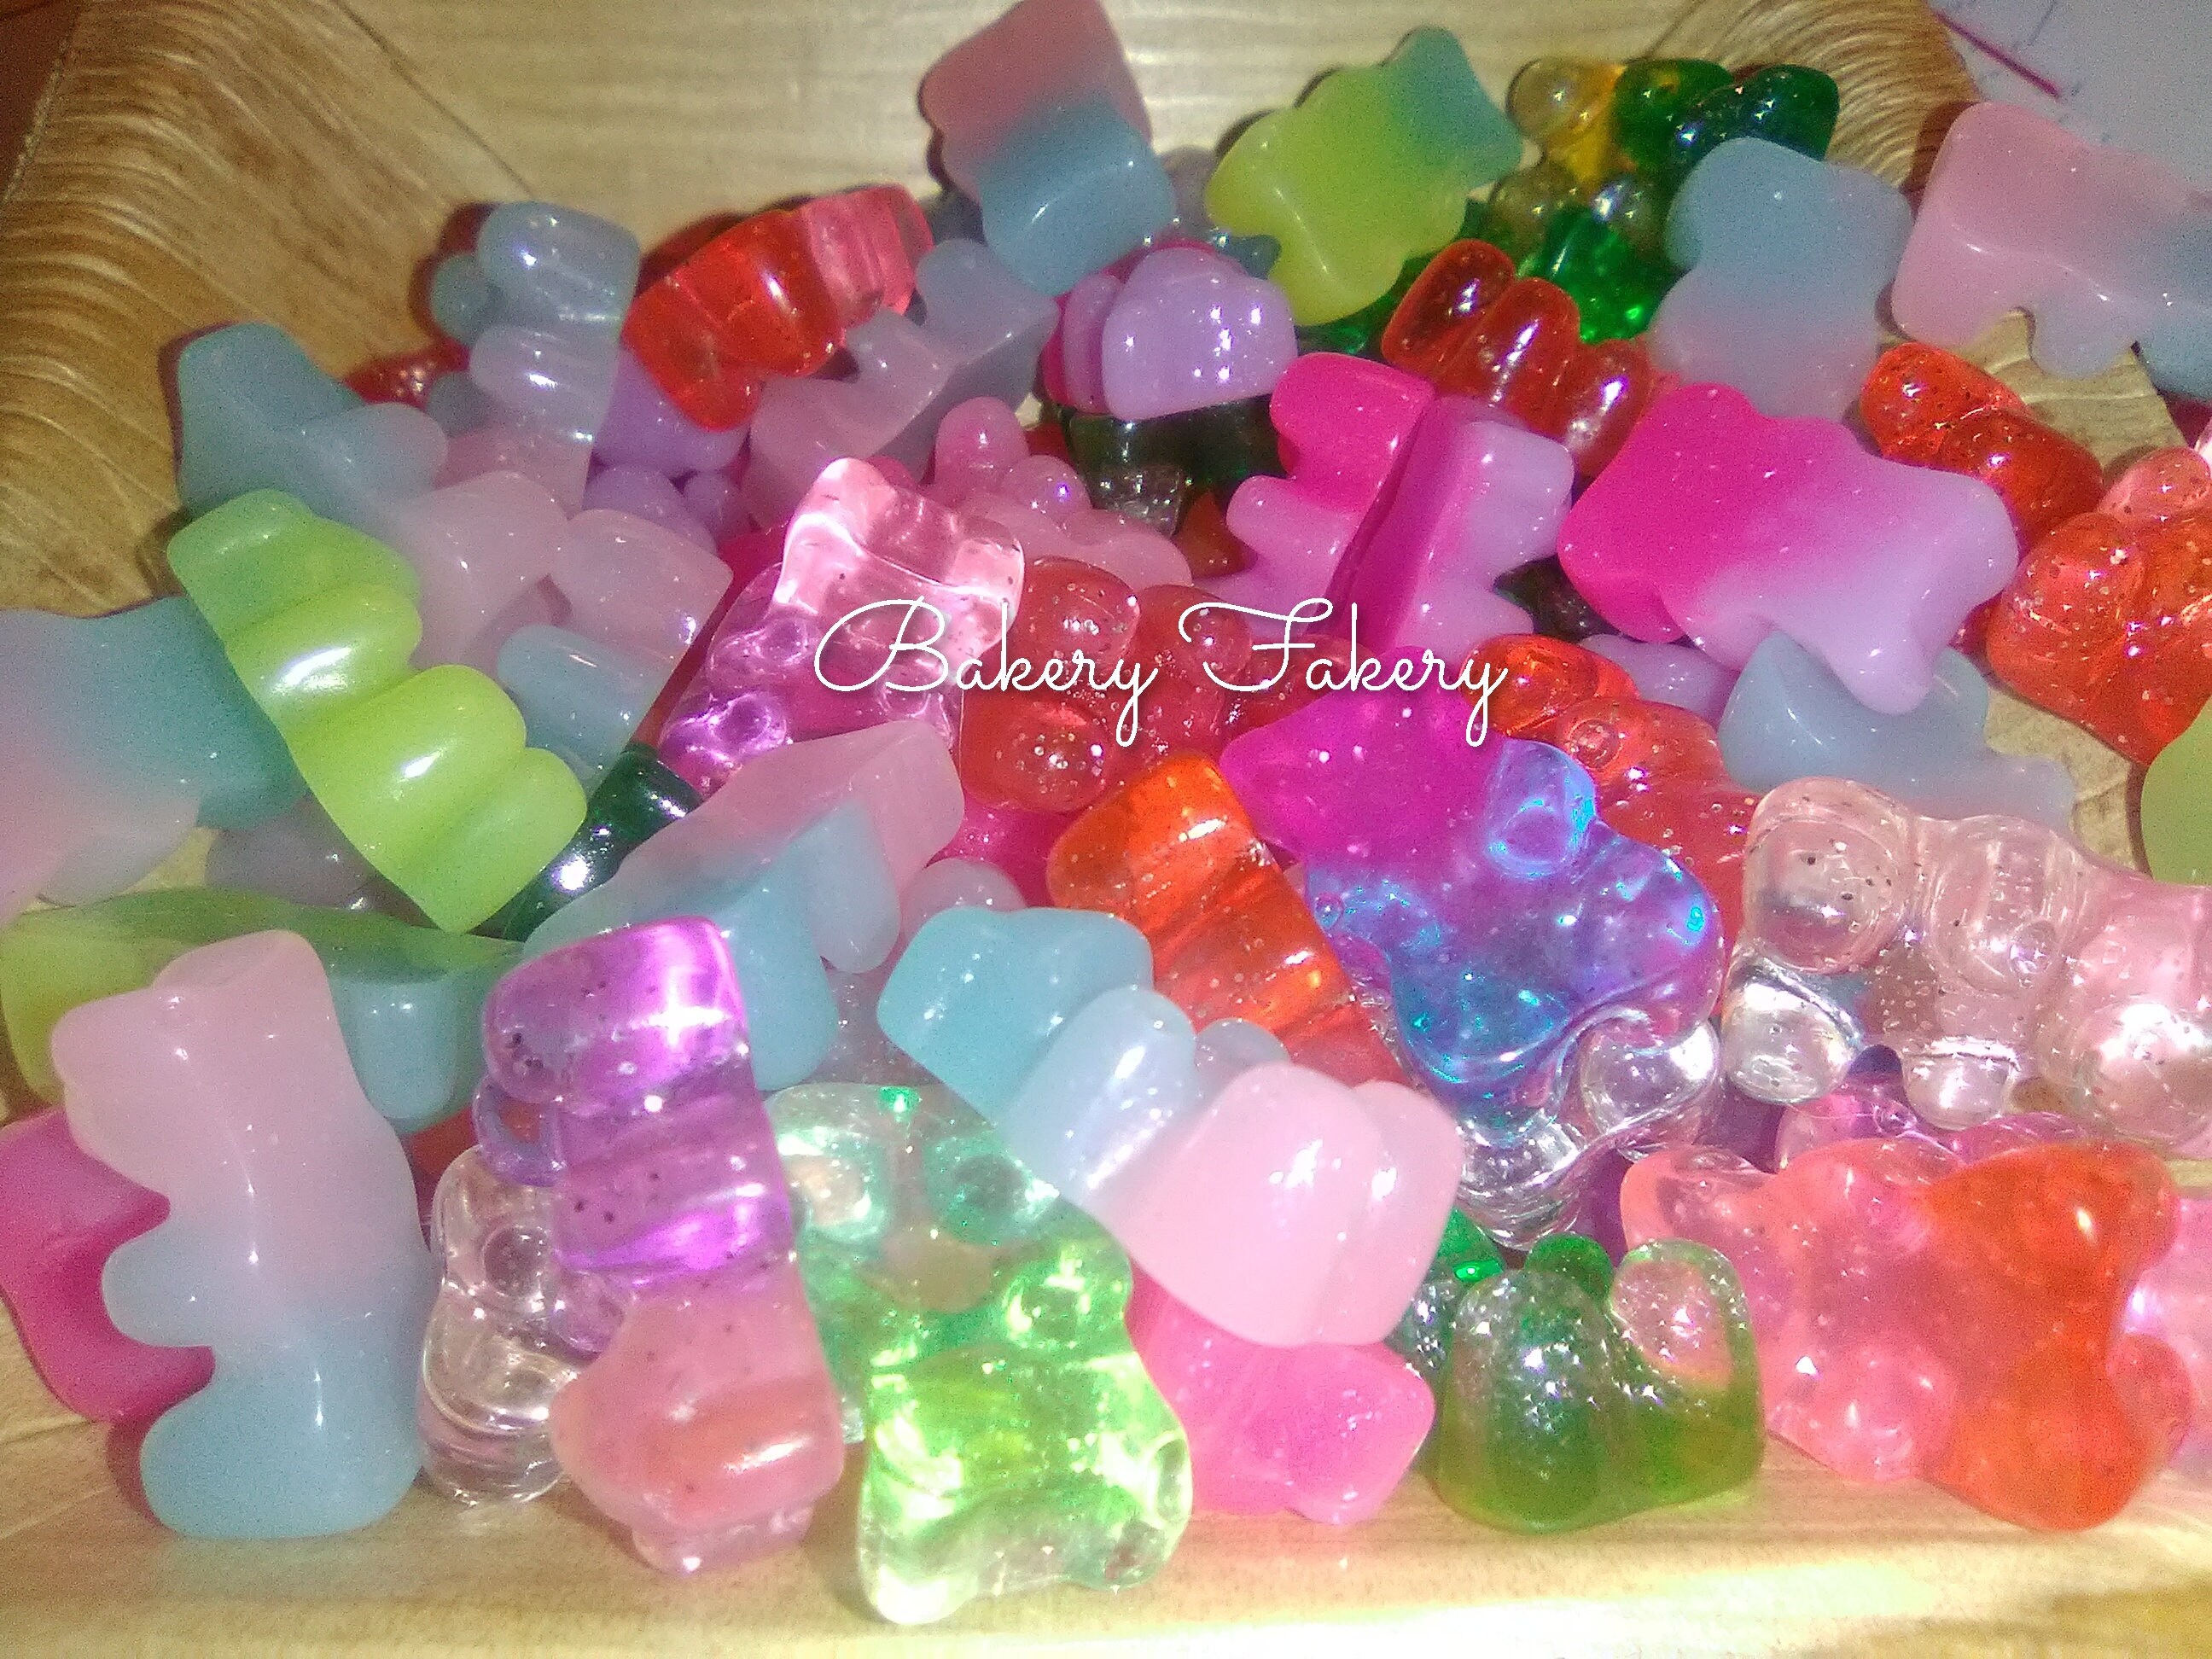 Fake Candy Cabochons, Fake Bear Candies, Faux Food Embellishments, MiniatureSweet, Kawaii Resin Crafts, Decoden Cabochons Supplies